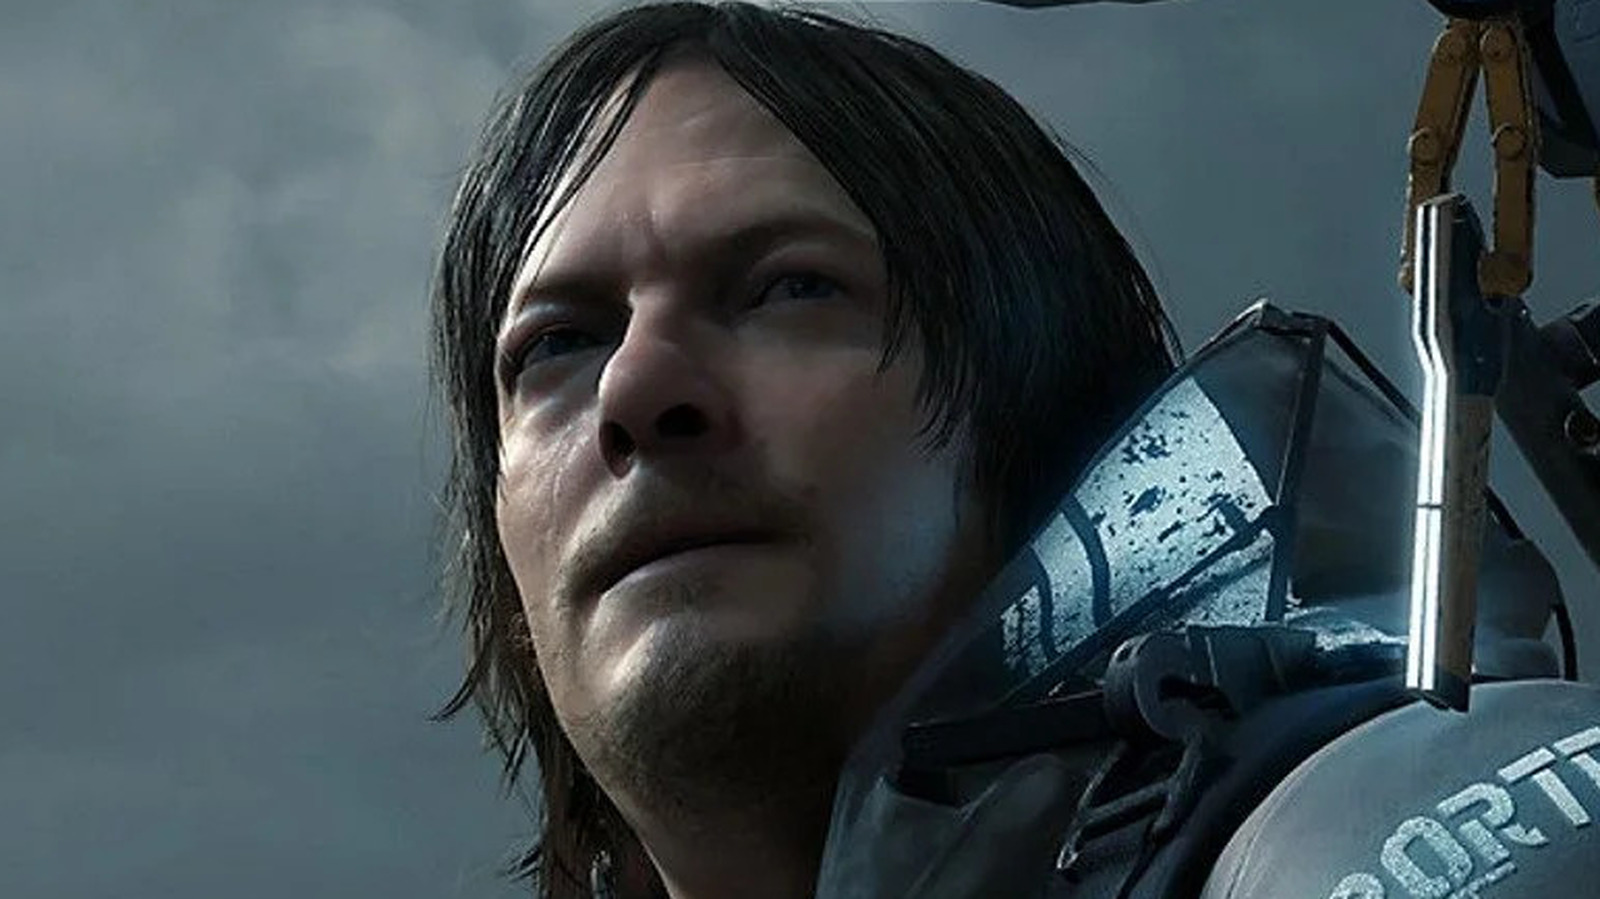 Death Stranding: Release Date, Story & What We Know About the Game